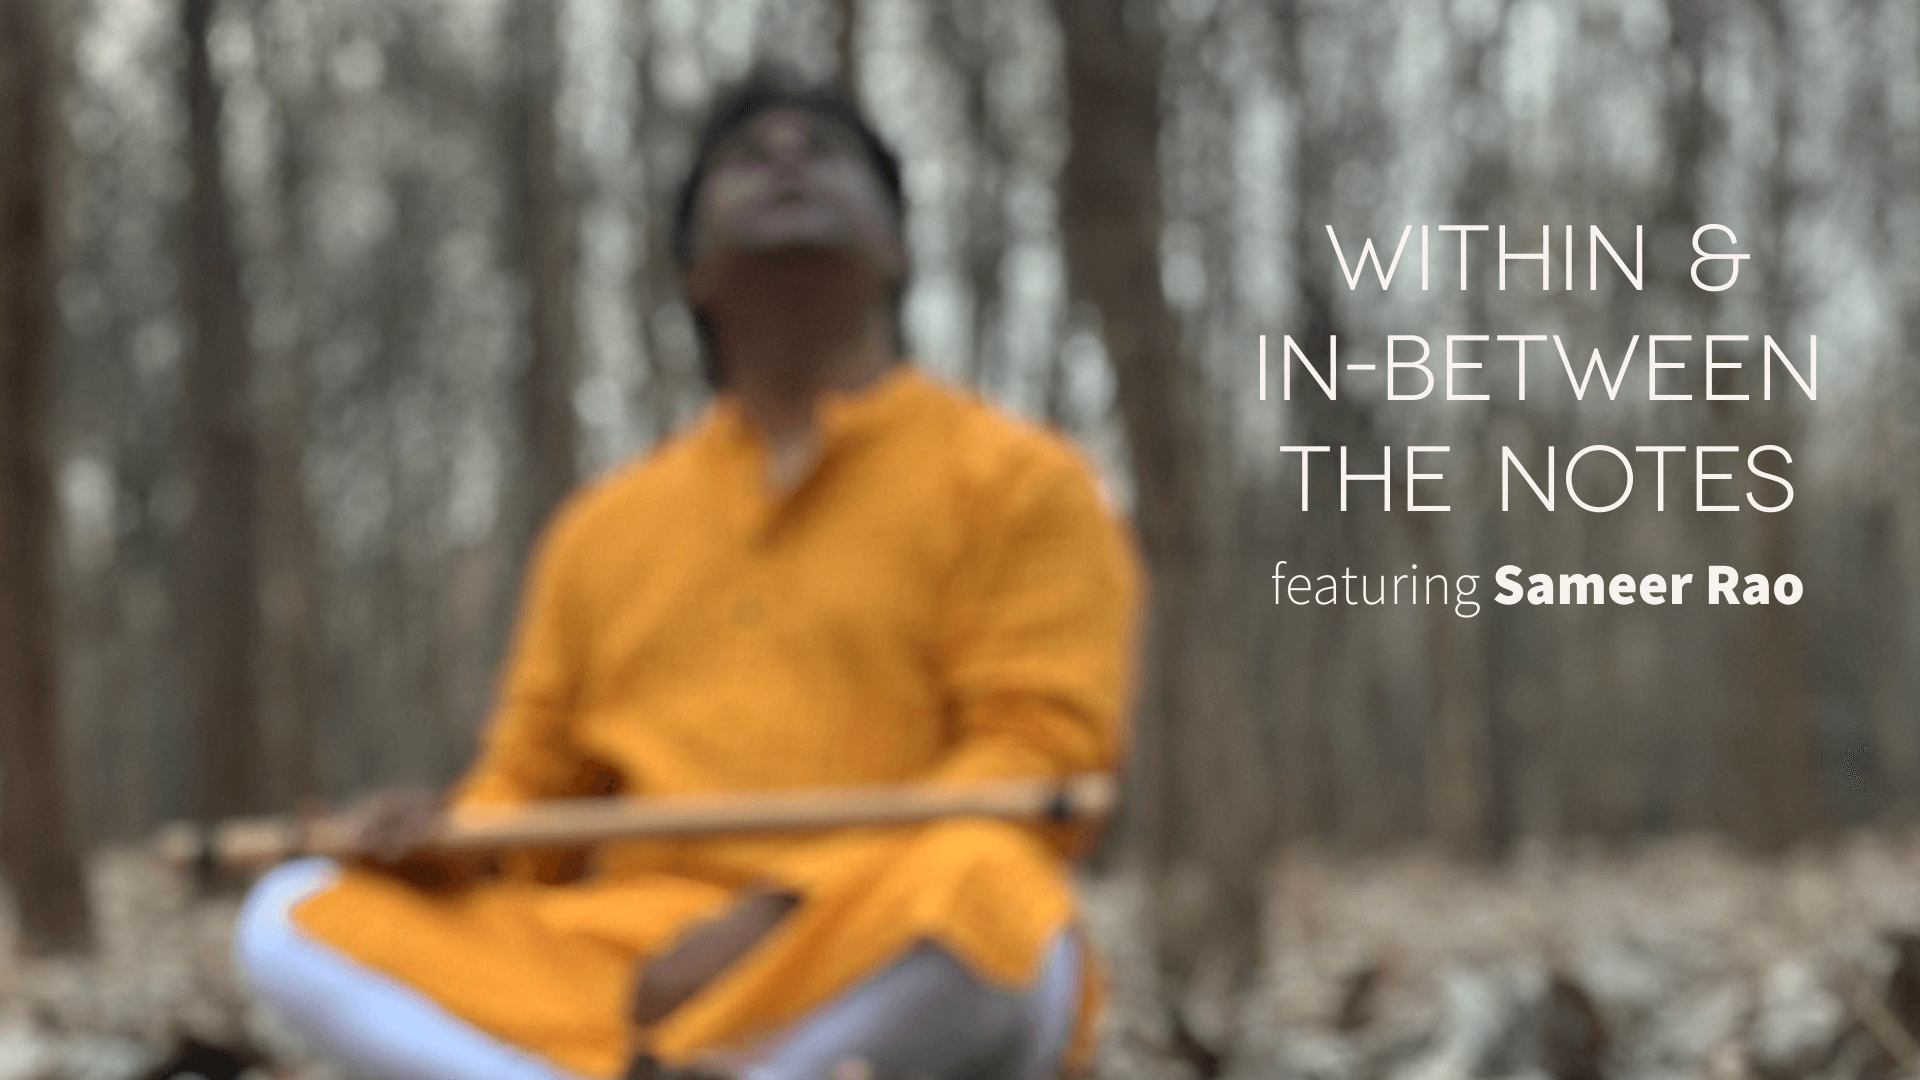 Indian classical music - Within & In-between the notes - Ft. Sameer Rao (Bansuri)